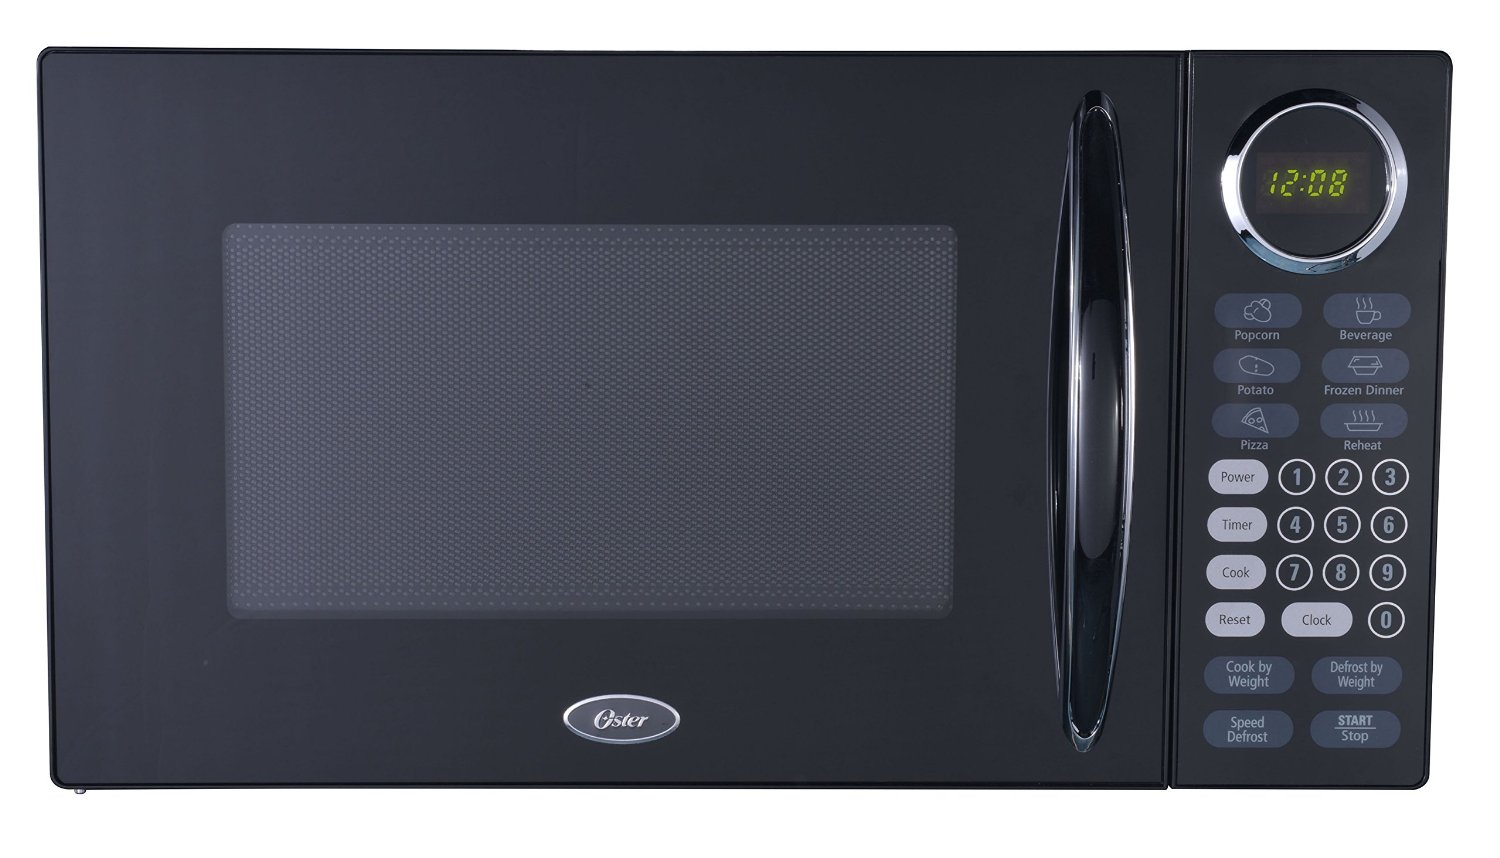 Oster OGB8902-B 0.9-Cubic Foot Microwave Oven, Black